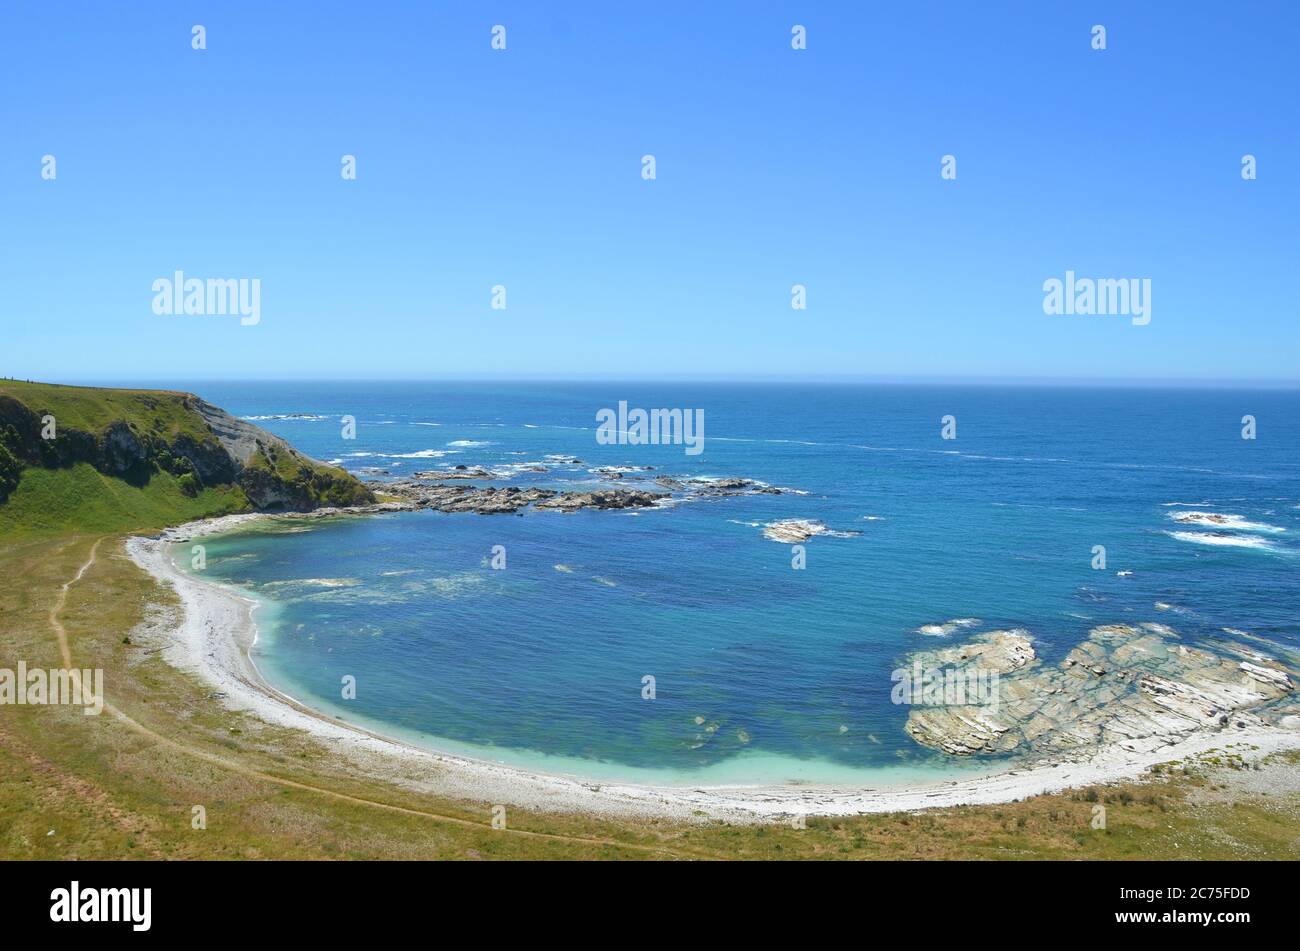 The picturesque coastal town of Kaikoura is the perfect place for marine life encounters, coastal walks, and tucking into a plate of crayfish. Stock Photo